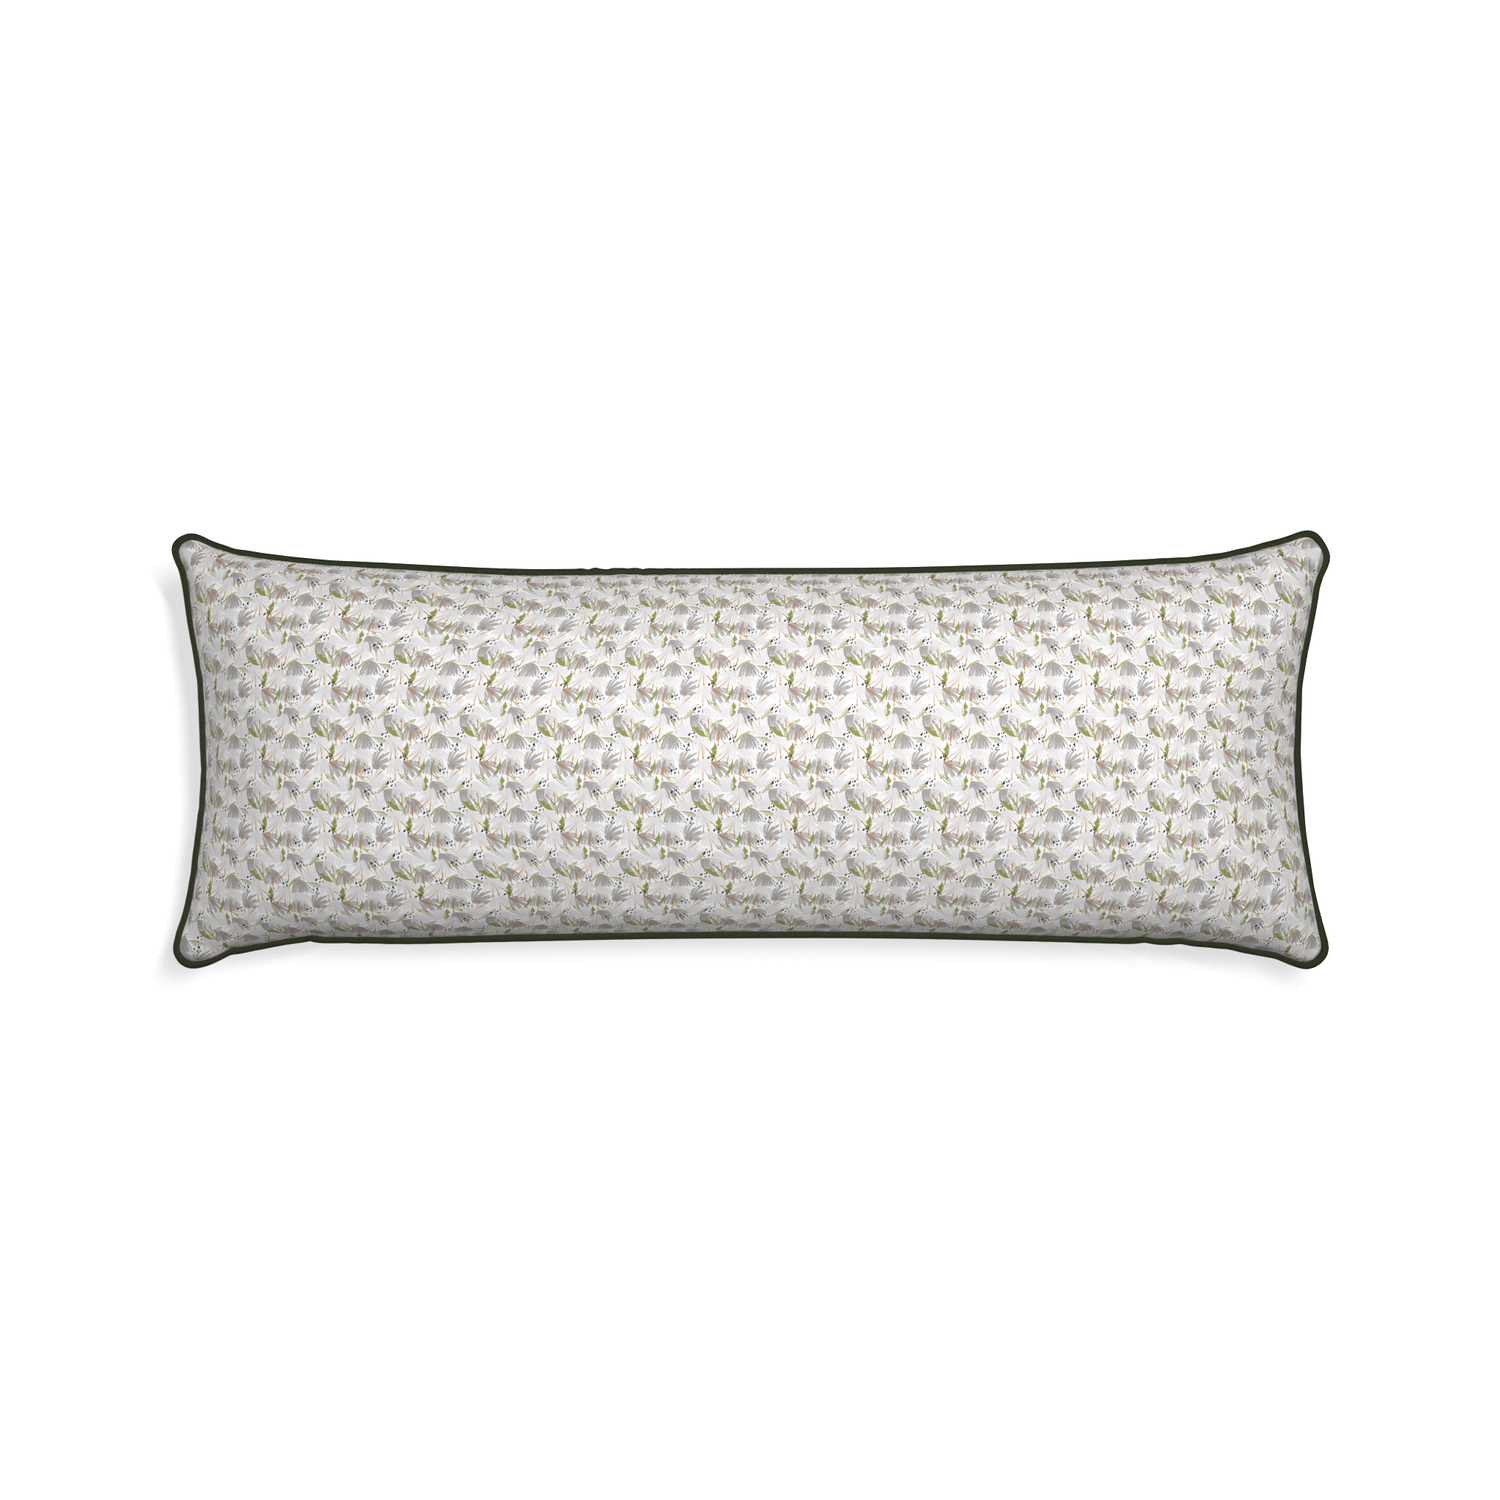 Xl-lumbar eden grey custom grey floralpillow with f piping on white background